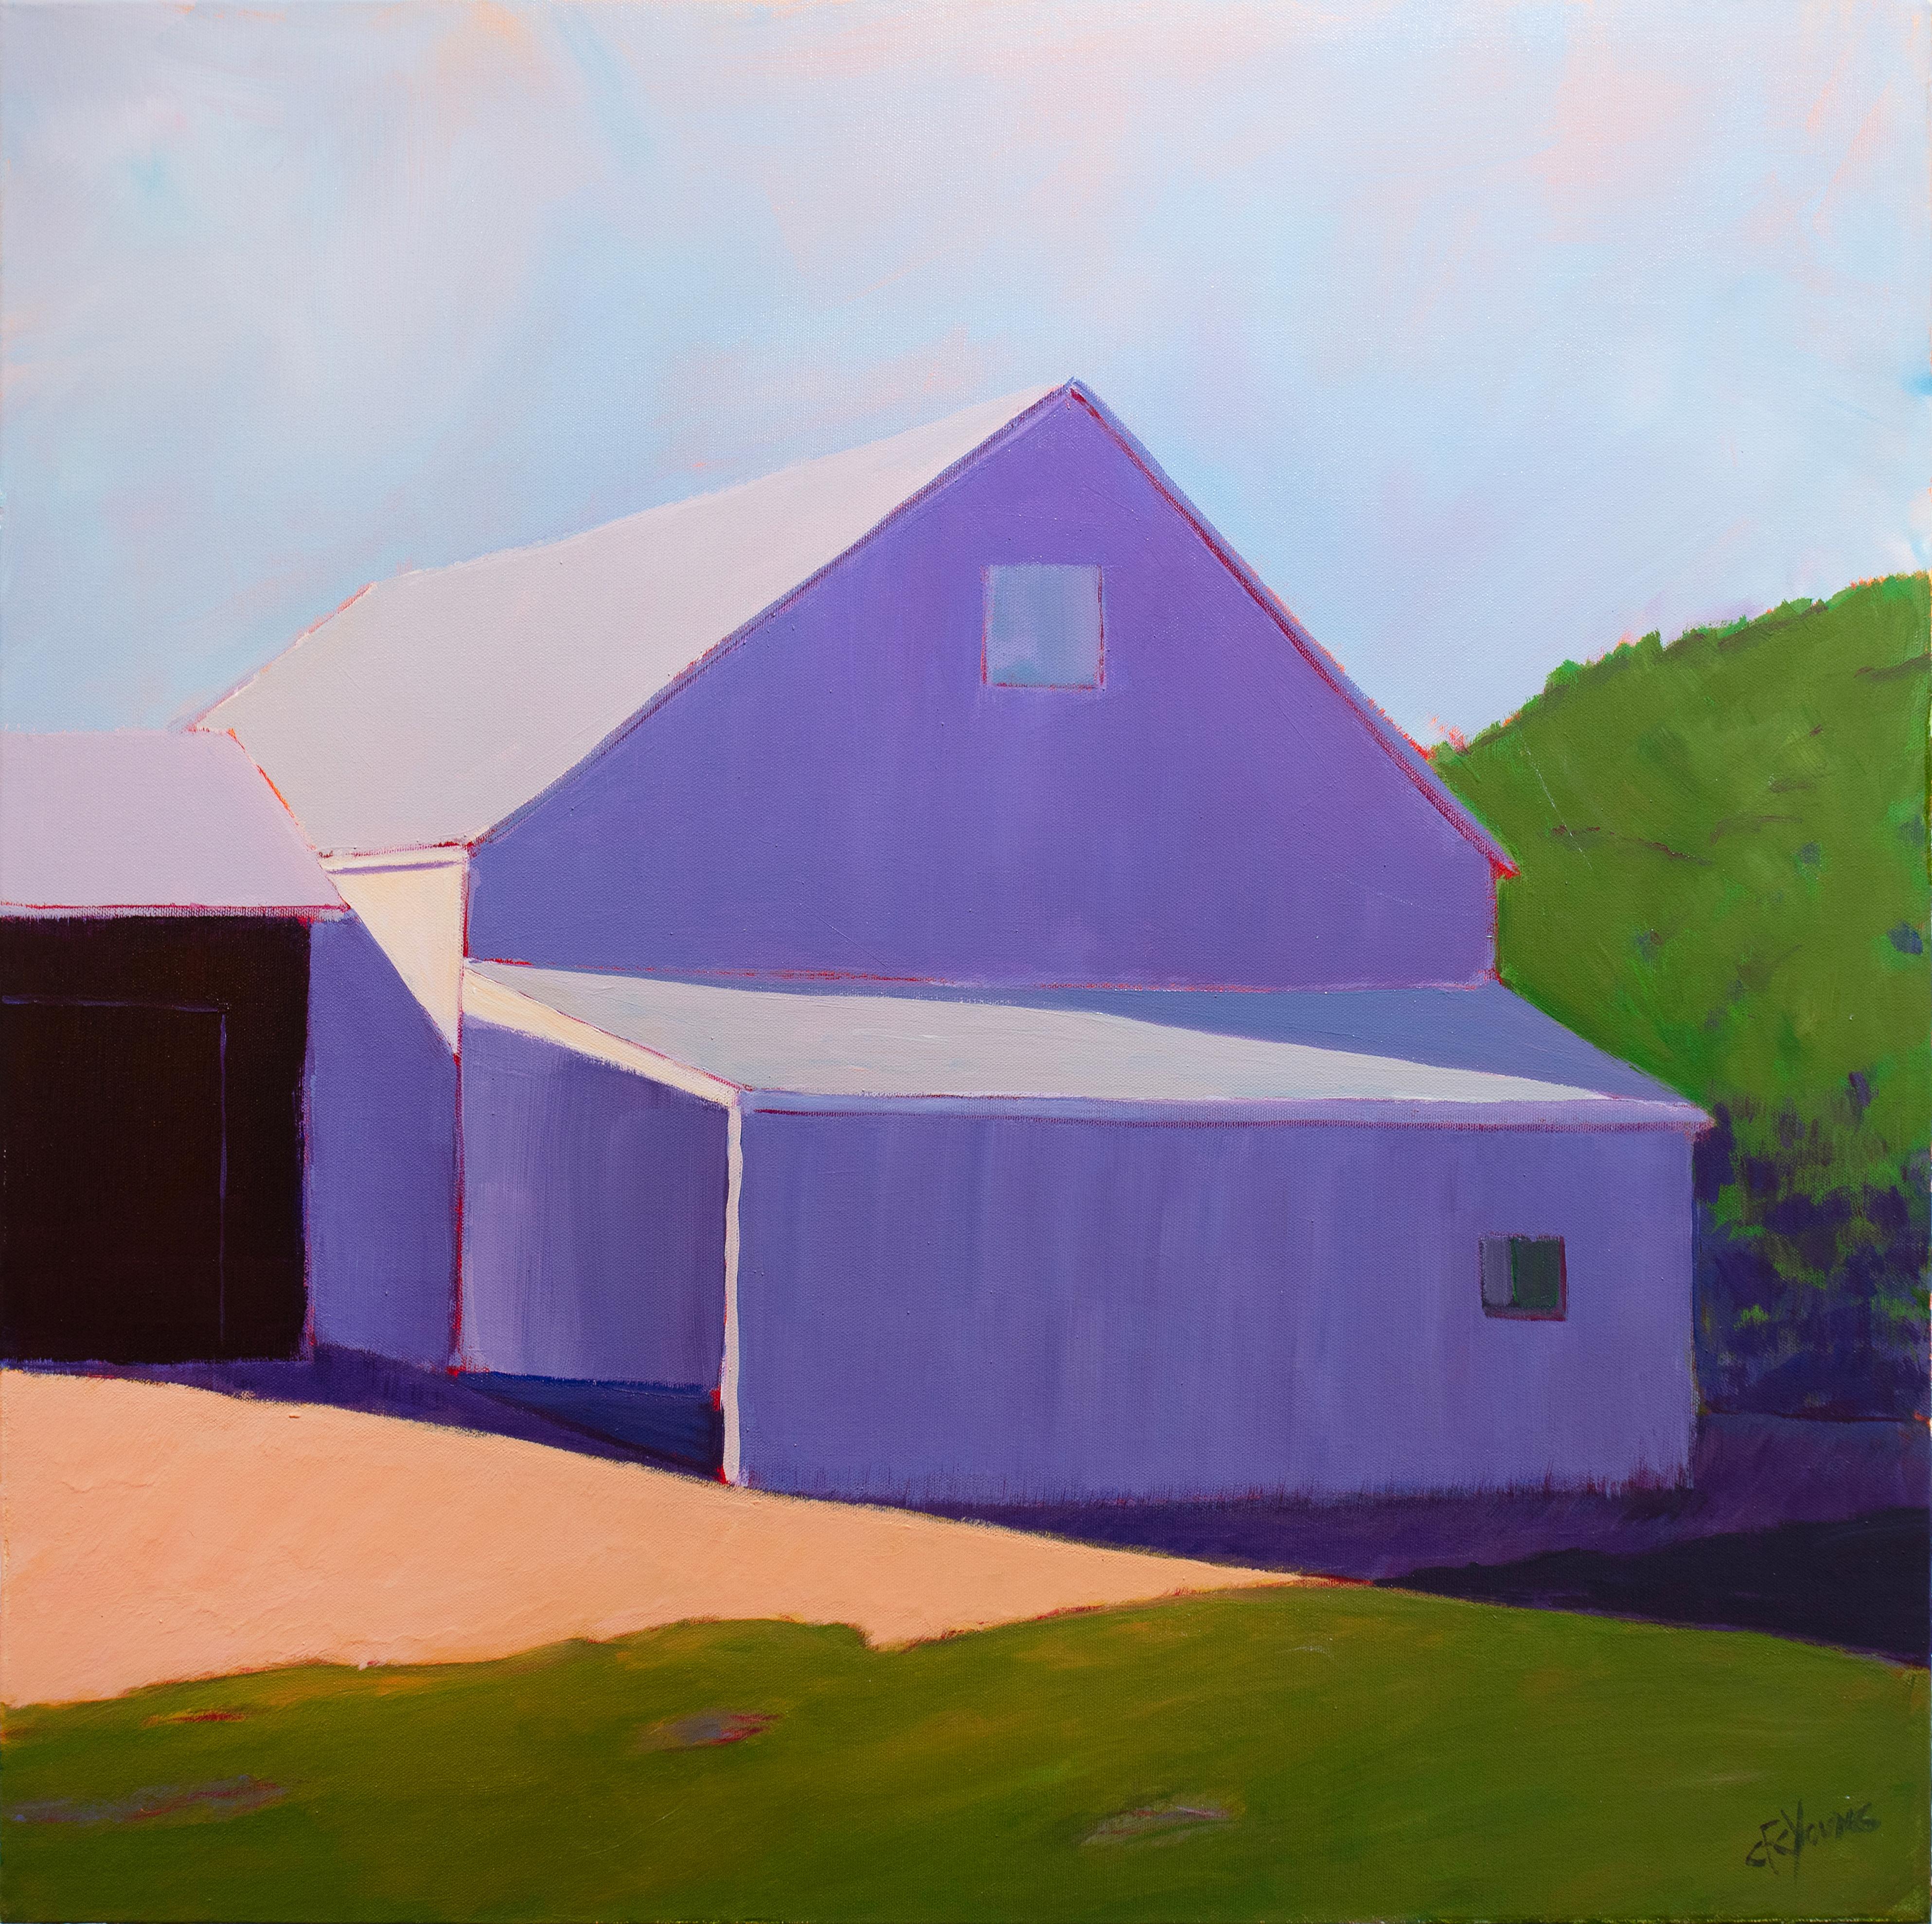 This contemporary realistic landscape painting by Carol Young captures a barn in a rural setting. It features a vibrant, contrasting palette with a violet architectural structure, green foliage, and a bright orange piece of land to the left of the